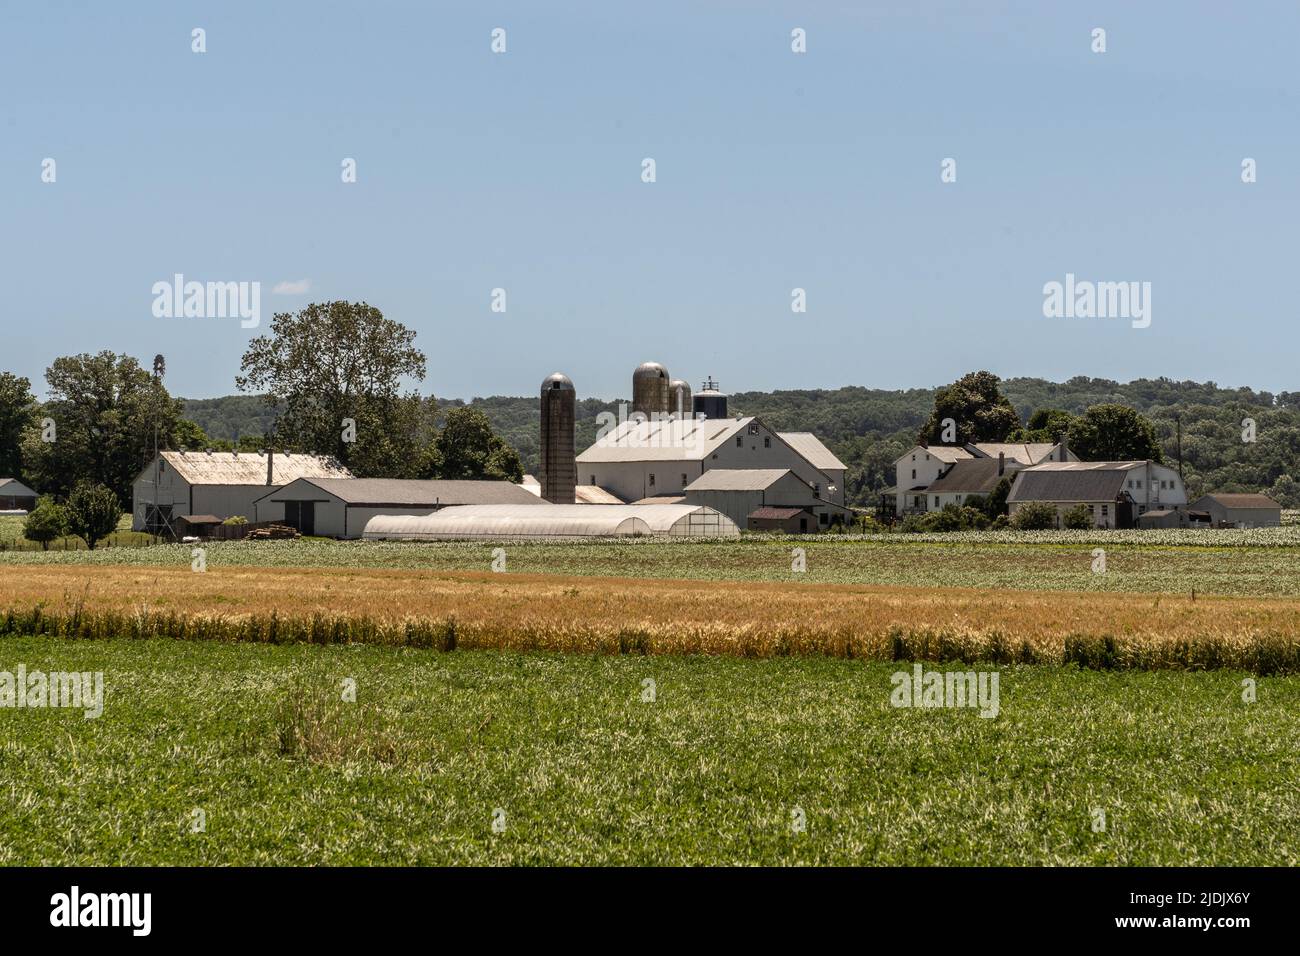 Amish Farm with white barn and windmill. Stock Photo